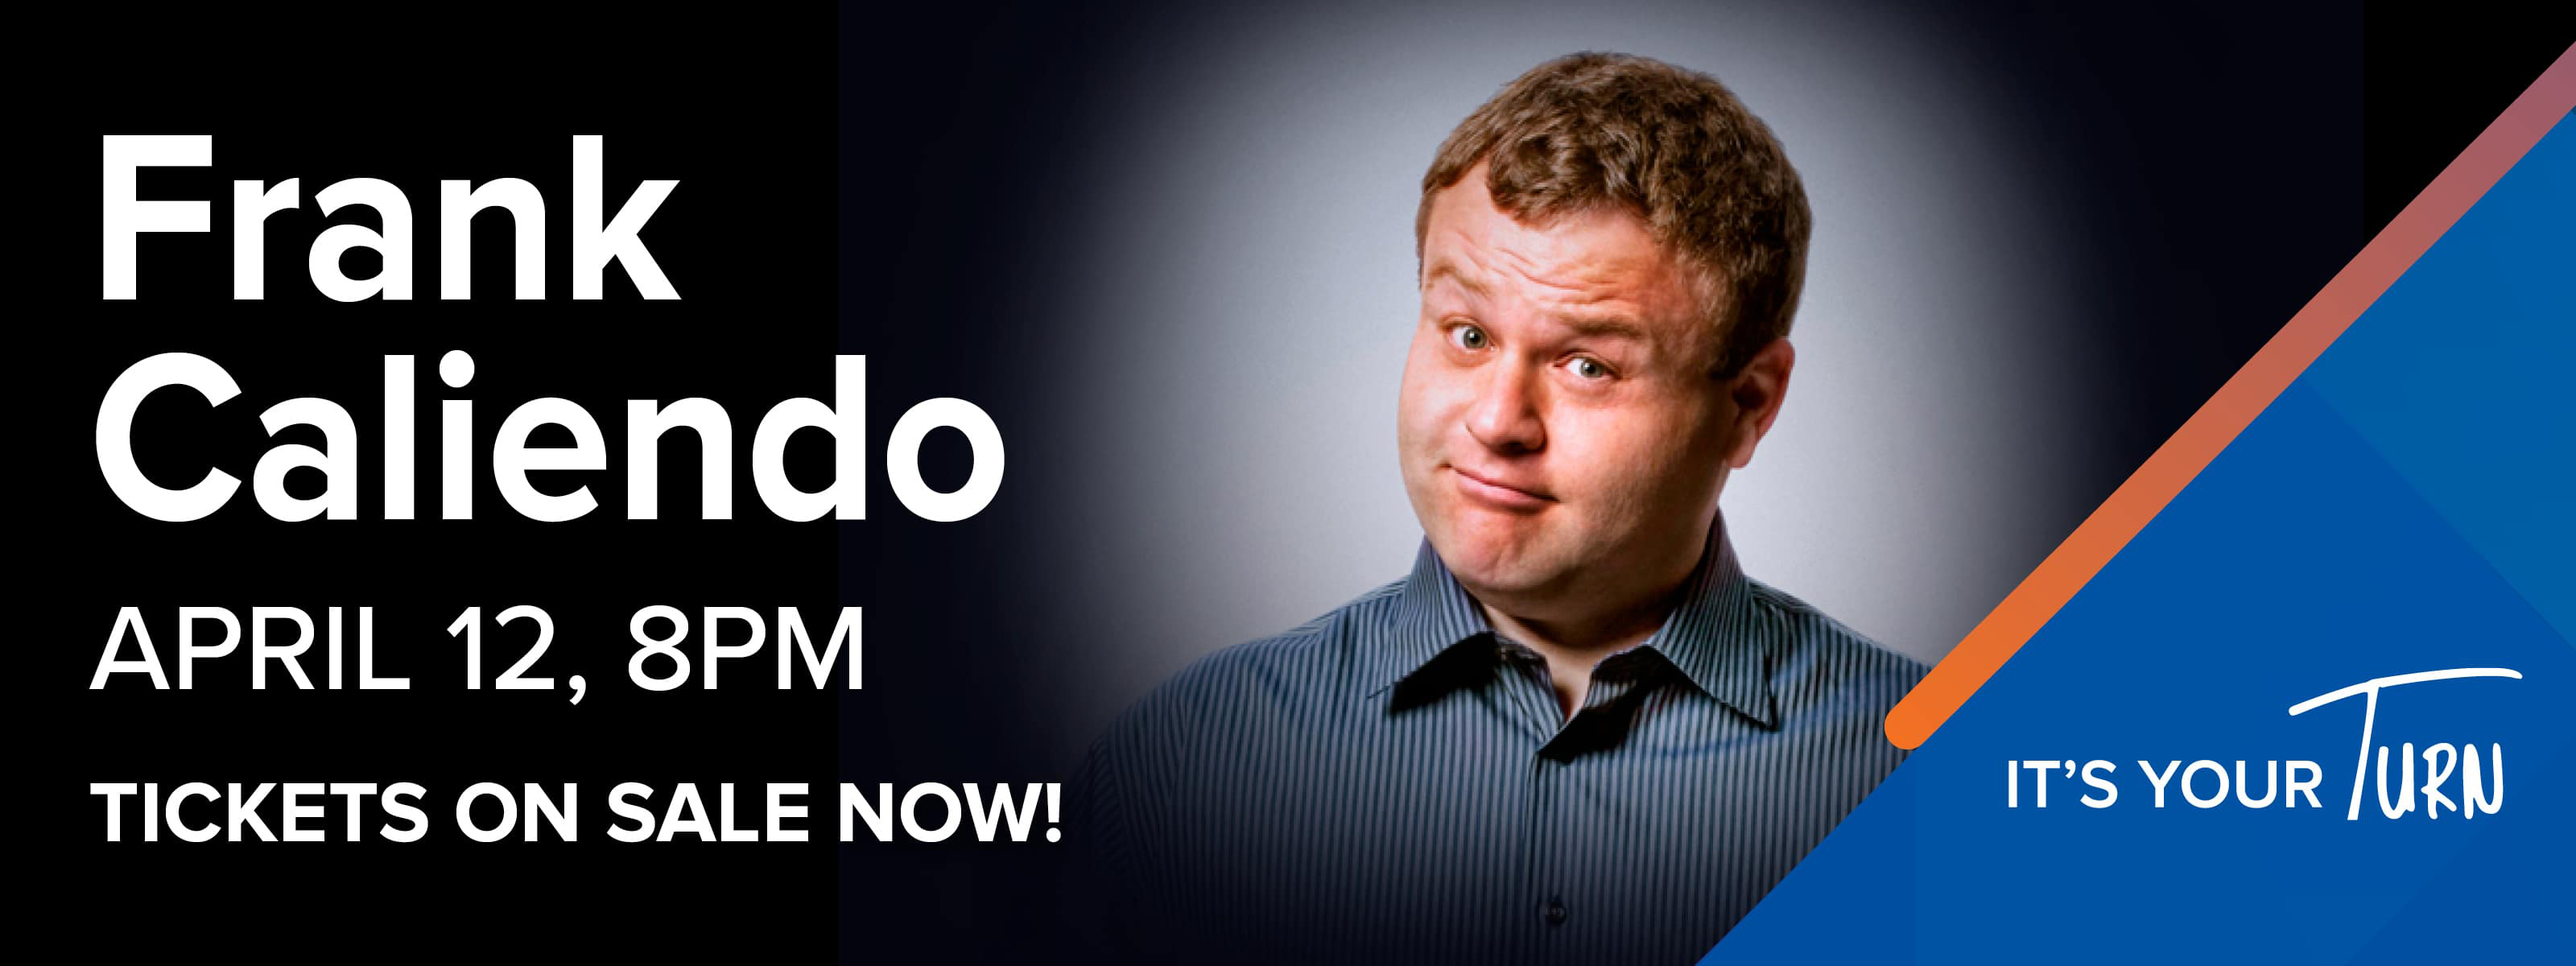 Frank Caliendo Tickets On Sale Now